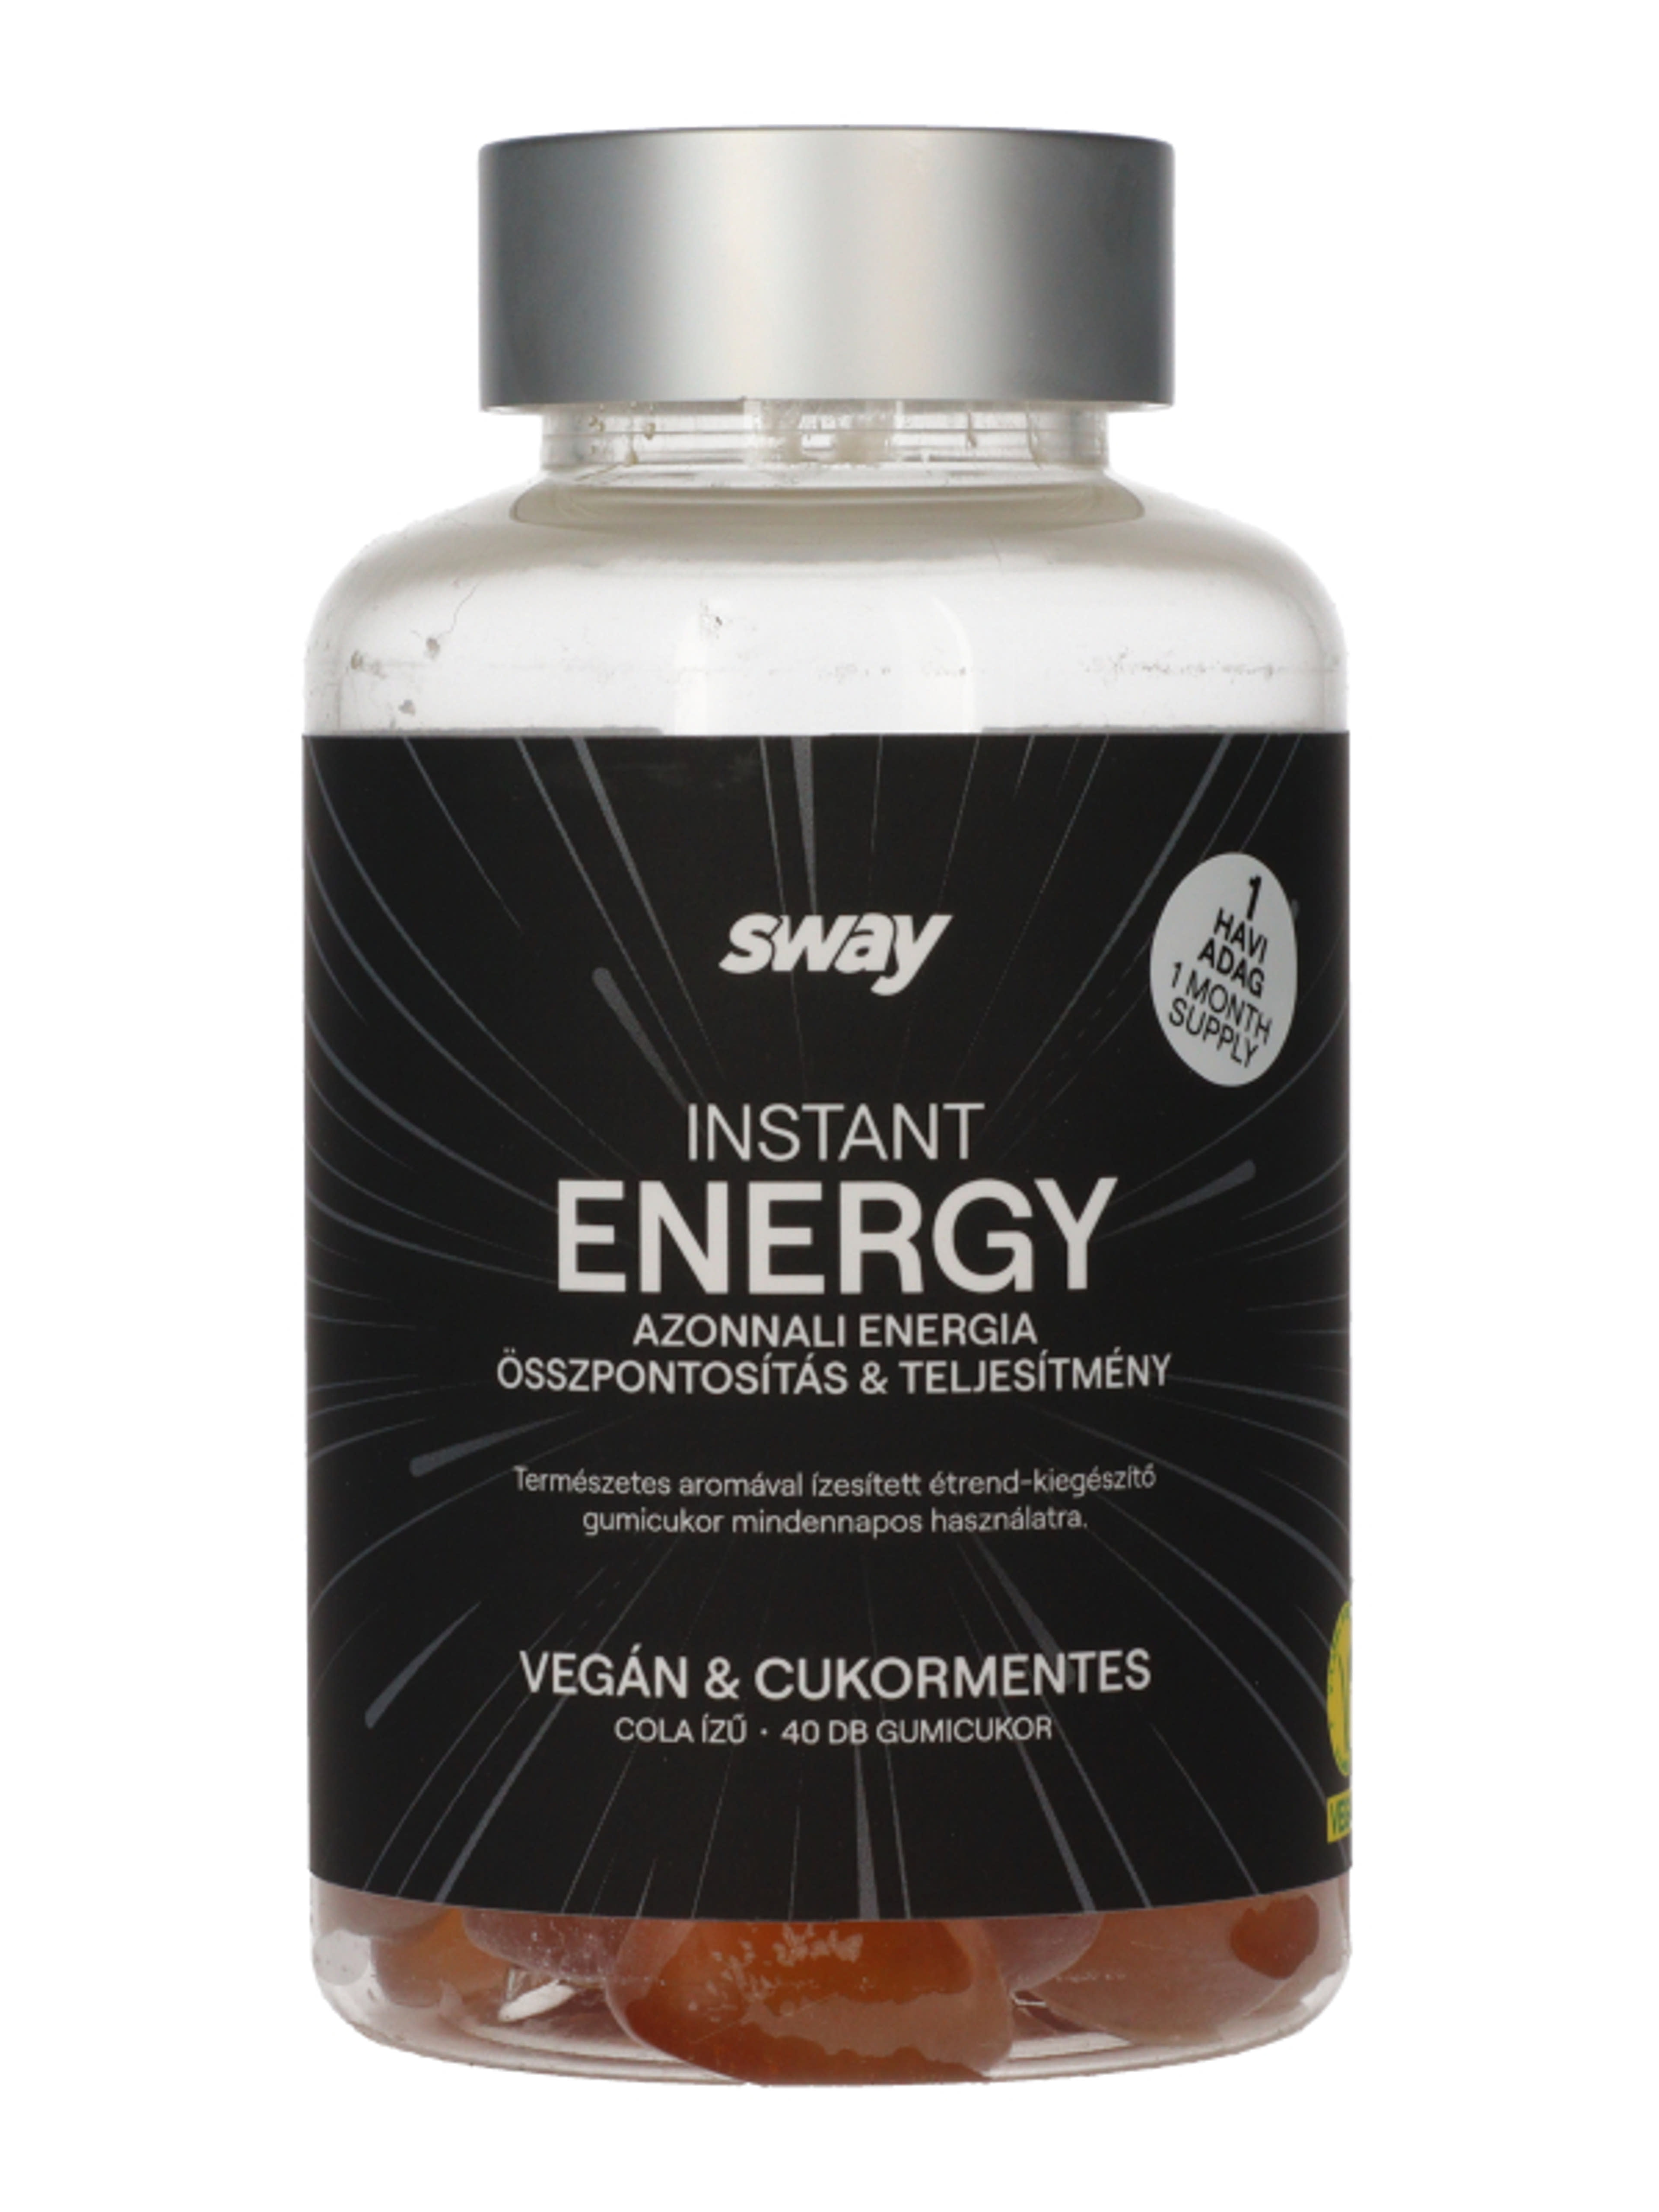 Sway Instant Energy gumivitamin - 162 g-2